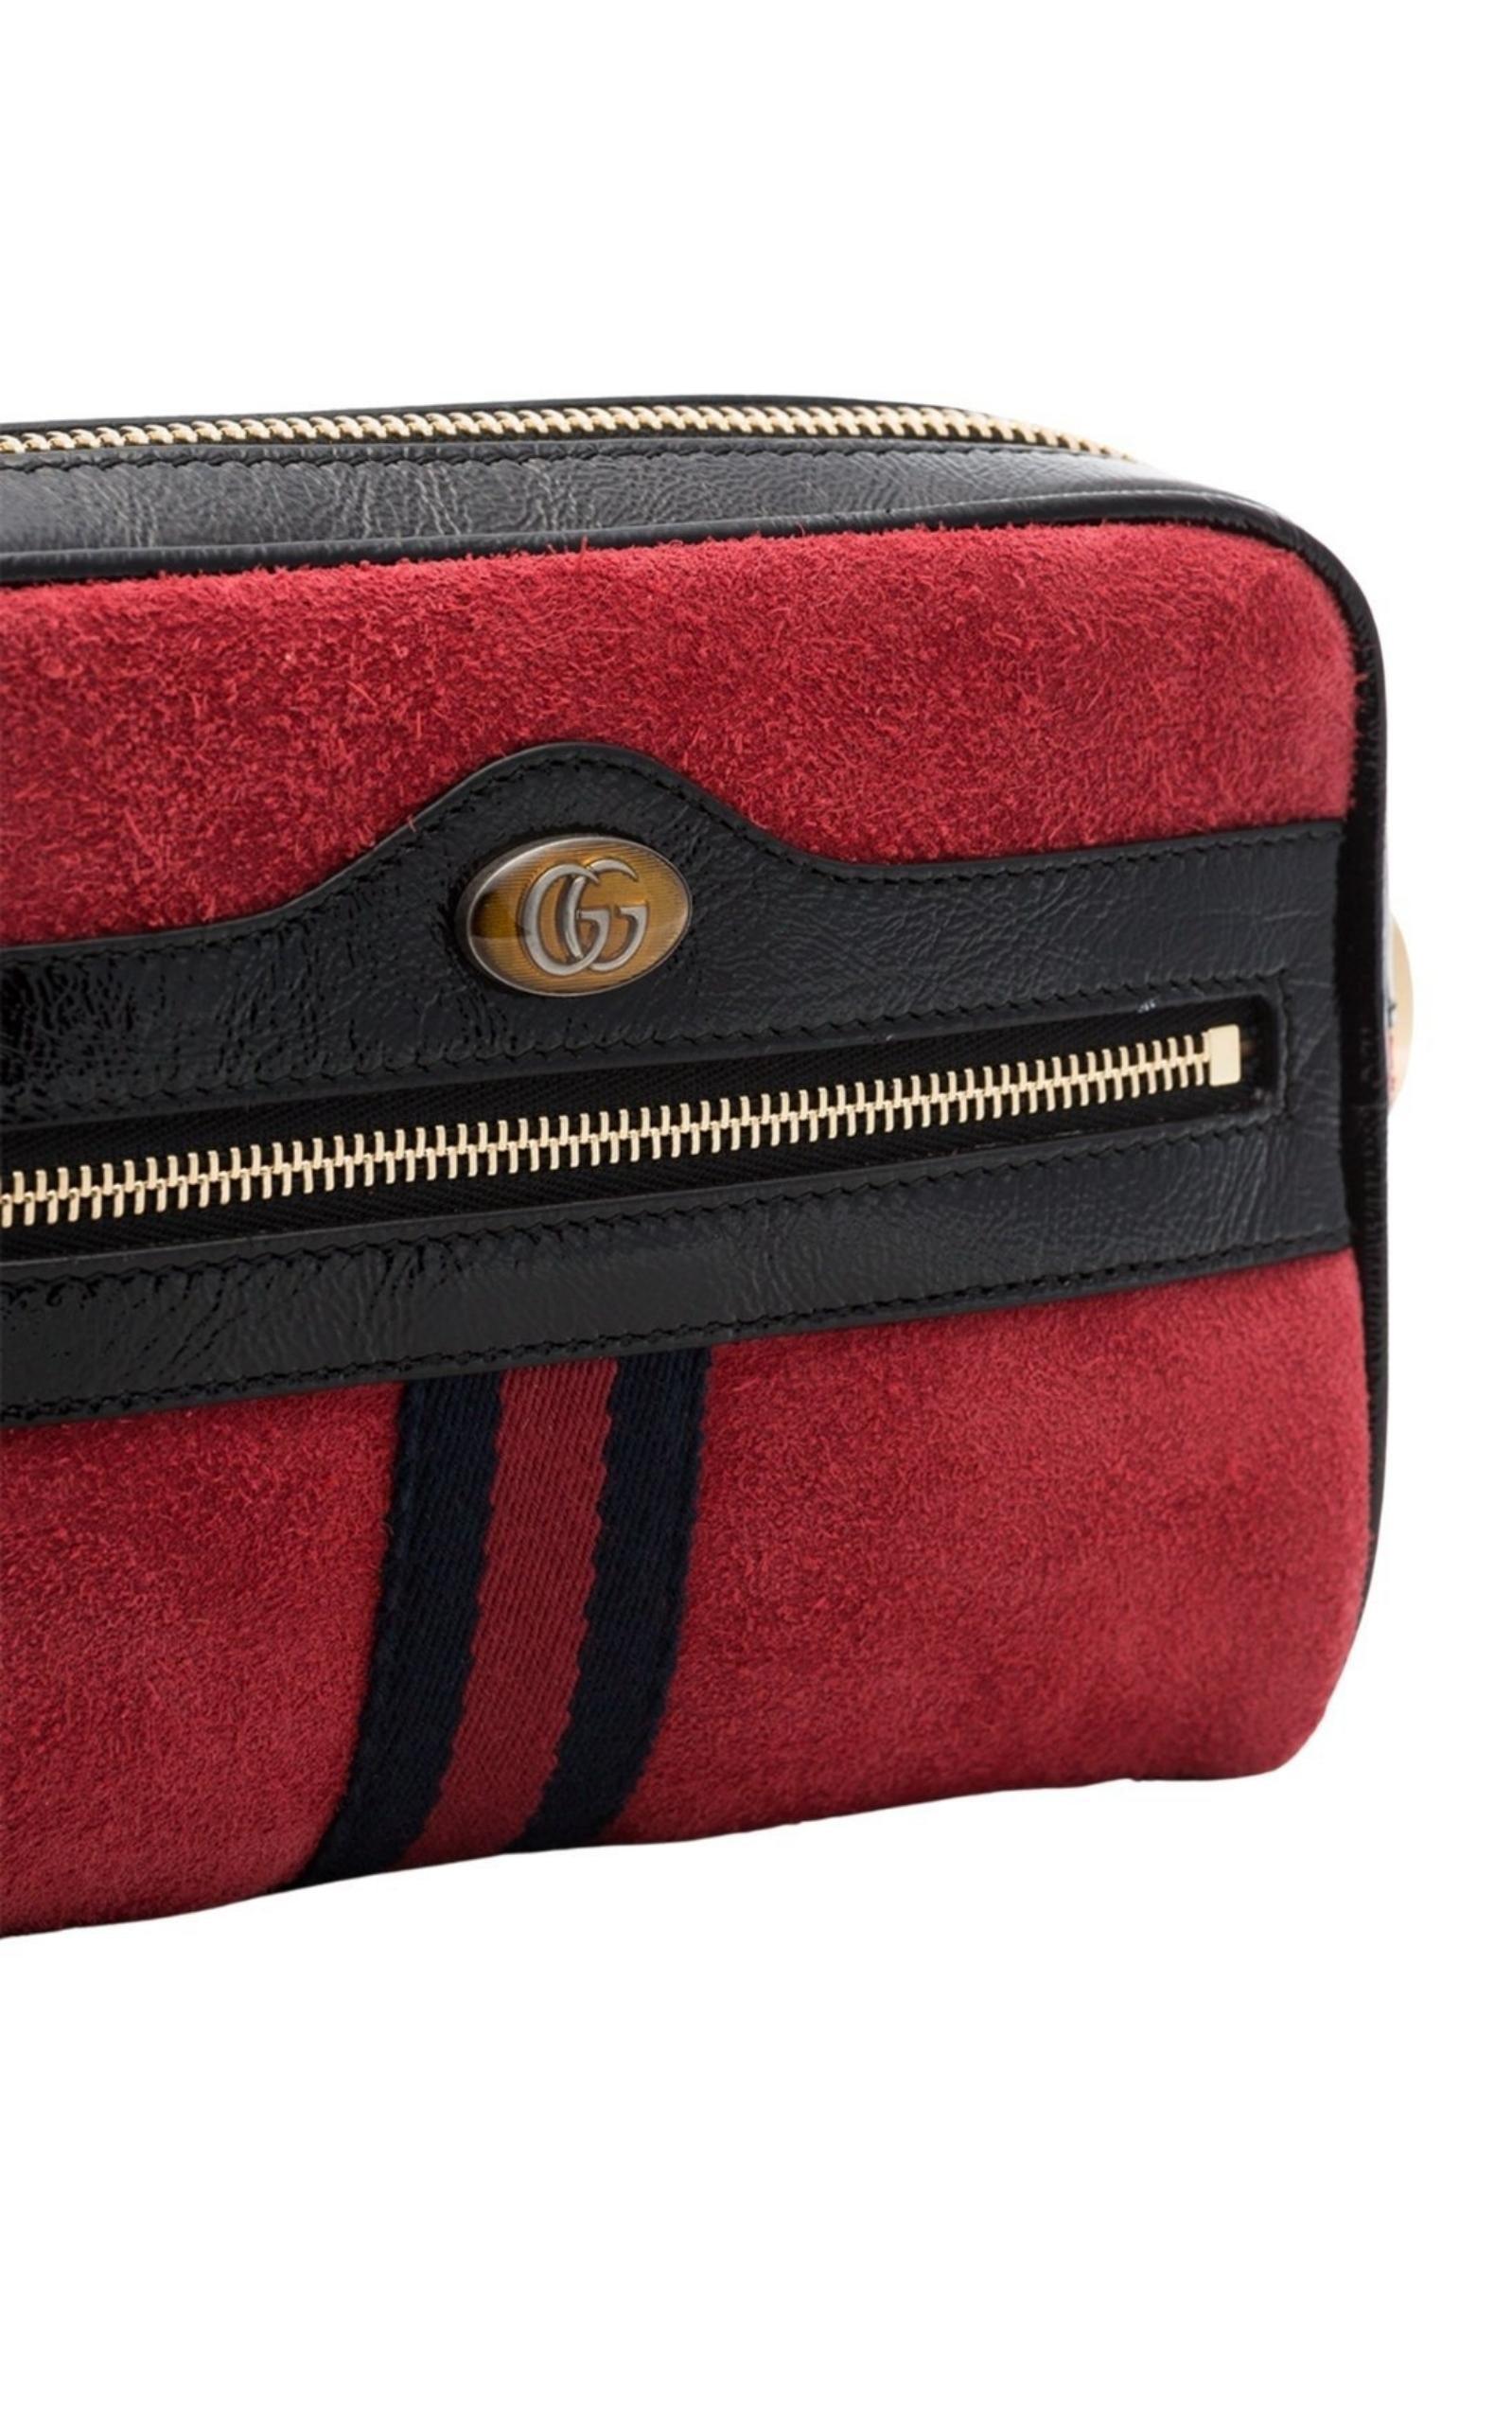 Gucci Ophidia Dome Shoulder Bag Suede Small Red - Bags